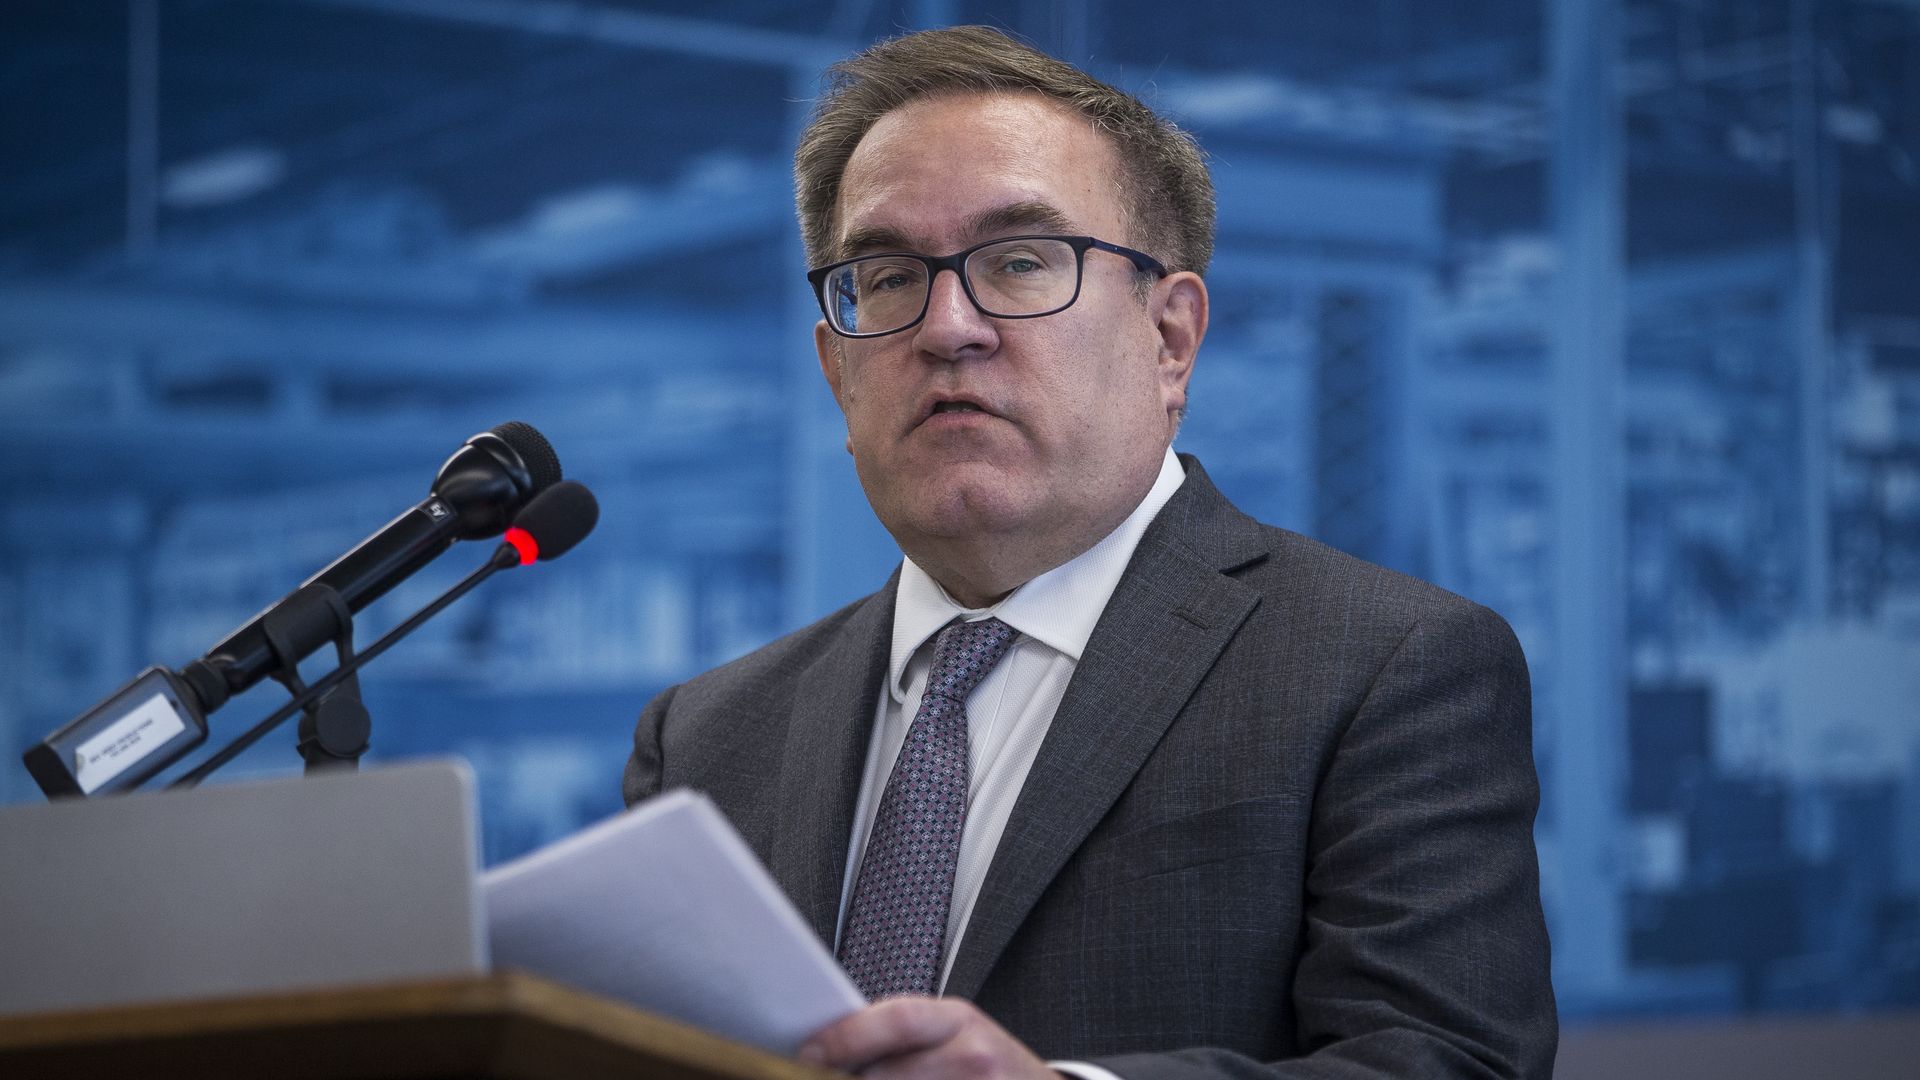 In this picture, EPA administrator Andrew Wheeler stands in a suit and tie and holds papers